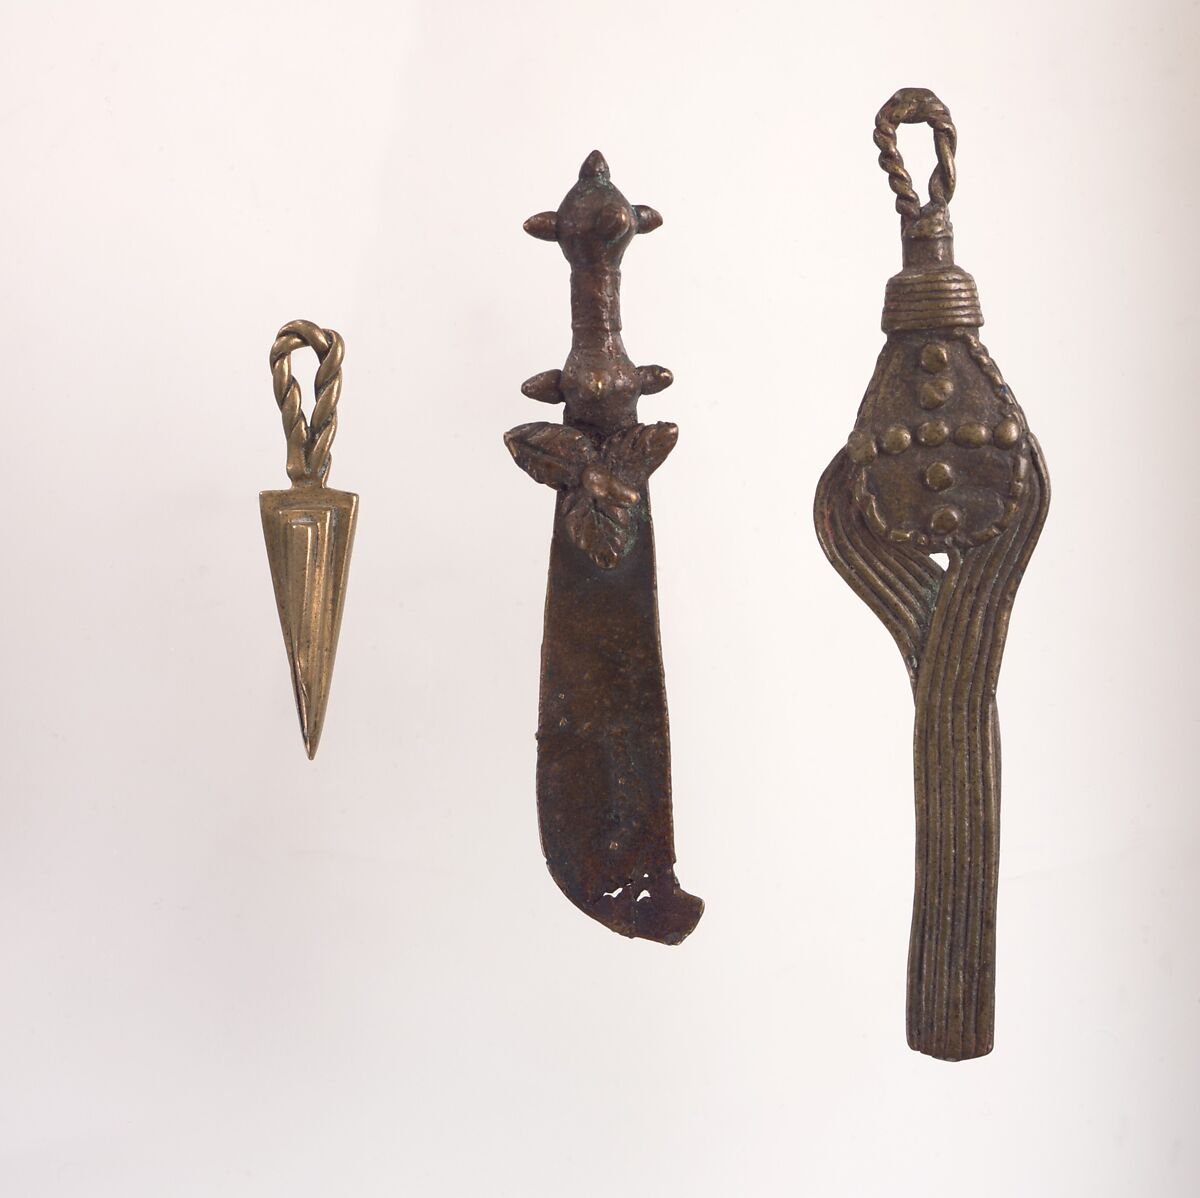 Three Gold Weights: Sword, Fly Whisk, Amulet